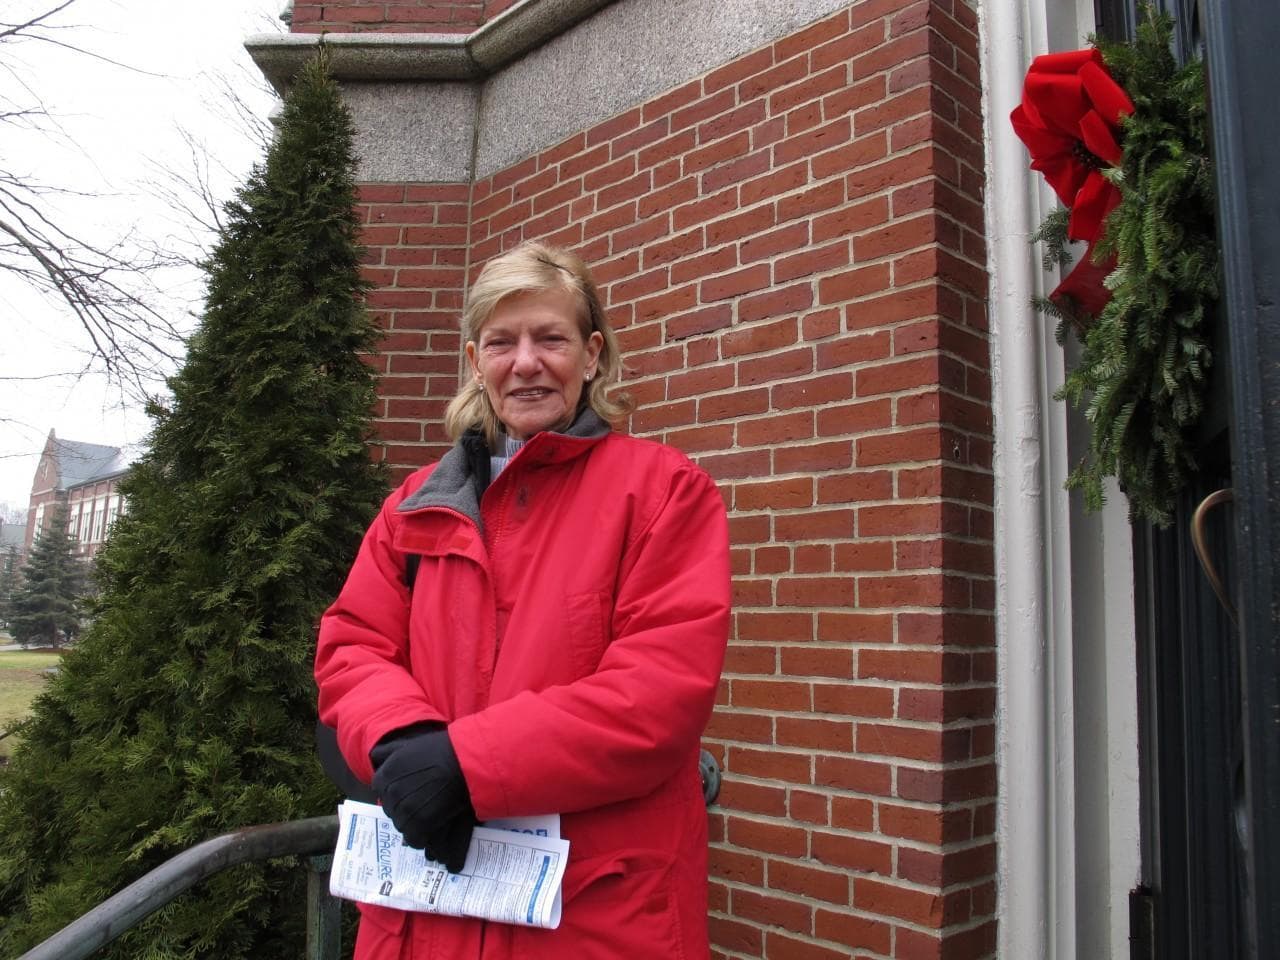 Our Lady Help of Christians parishioner Mary Cacioppo is supportive of the collaborative but worries there will be fewer Masses. (Monica Brady-Myerov/WBUR)